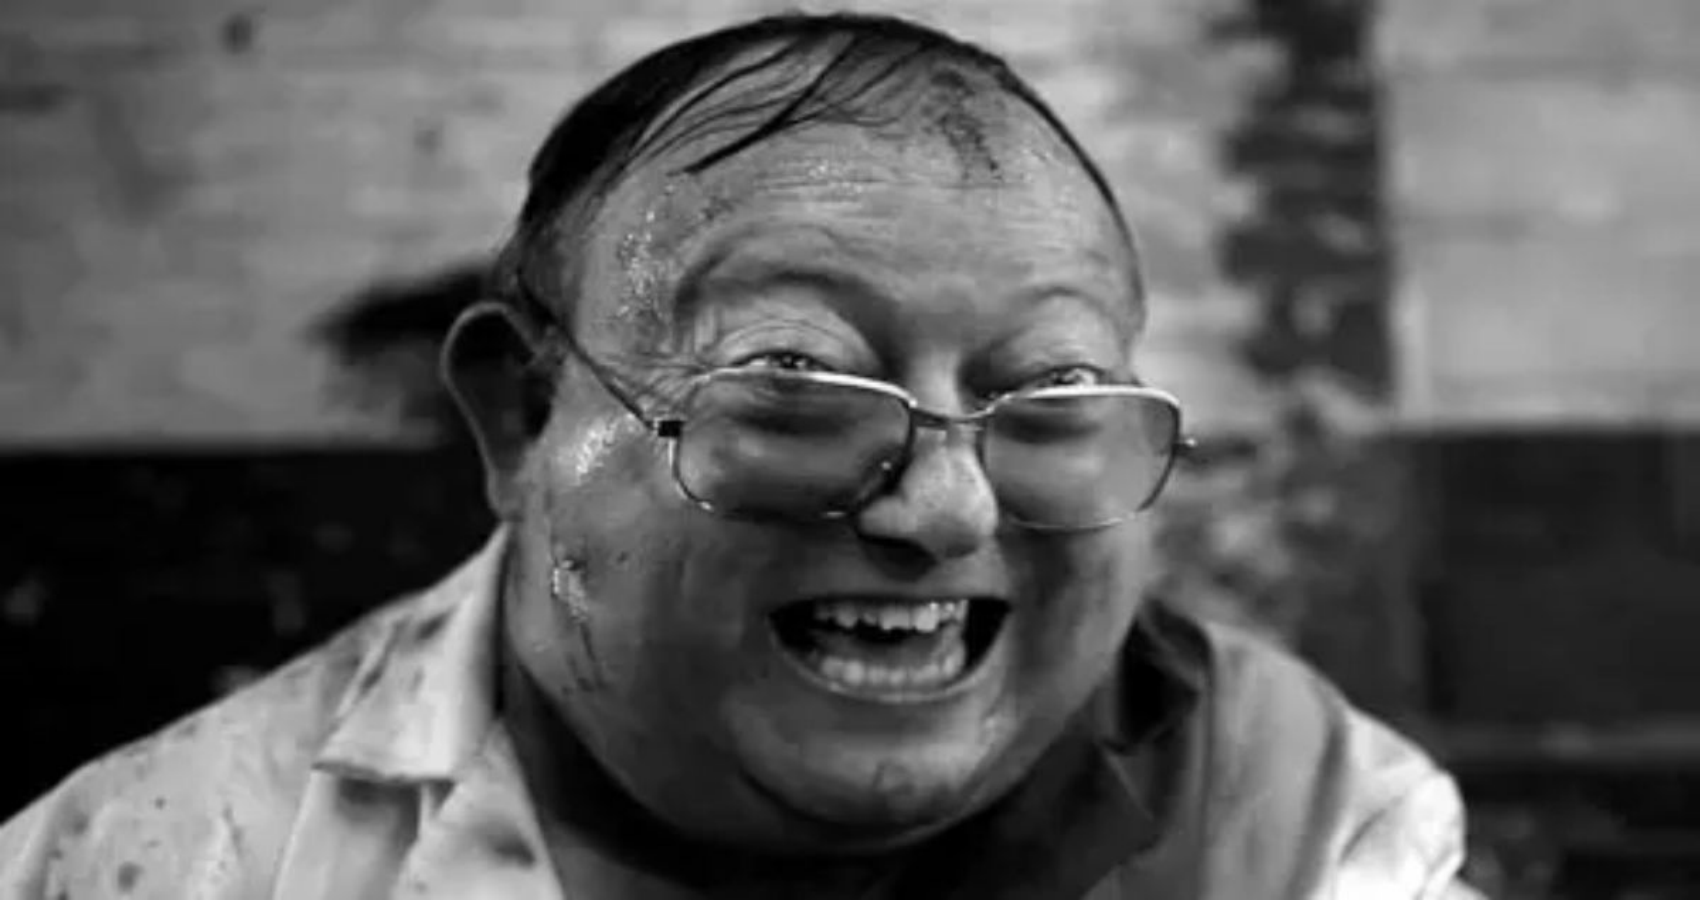 The mad scientist laughs in black and white in Human Centipede 2